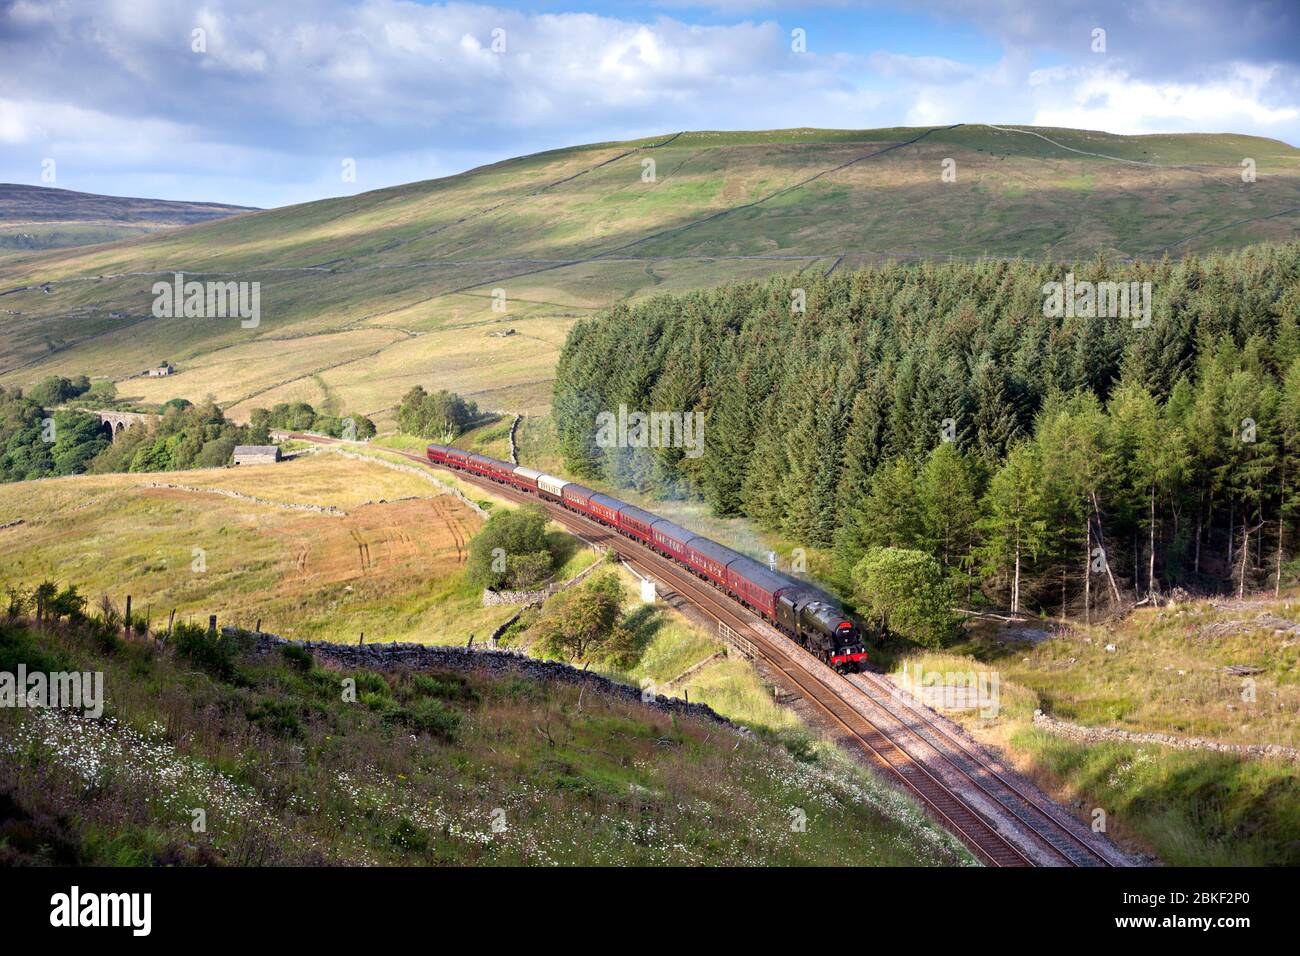 Steam locomotive 46115 Royal Scots Guardsman in Dentdale at the North portal of Blea Moor Tunnel on the settle to Carlisle railway Stock Photo